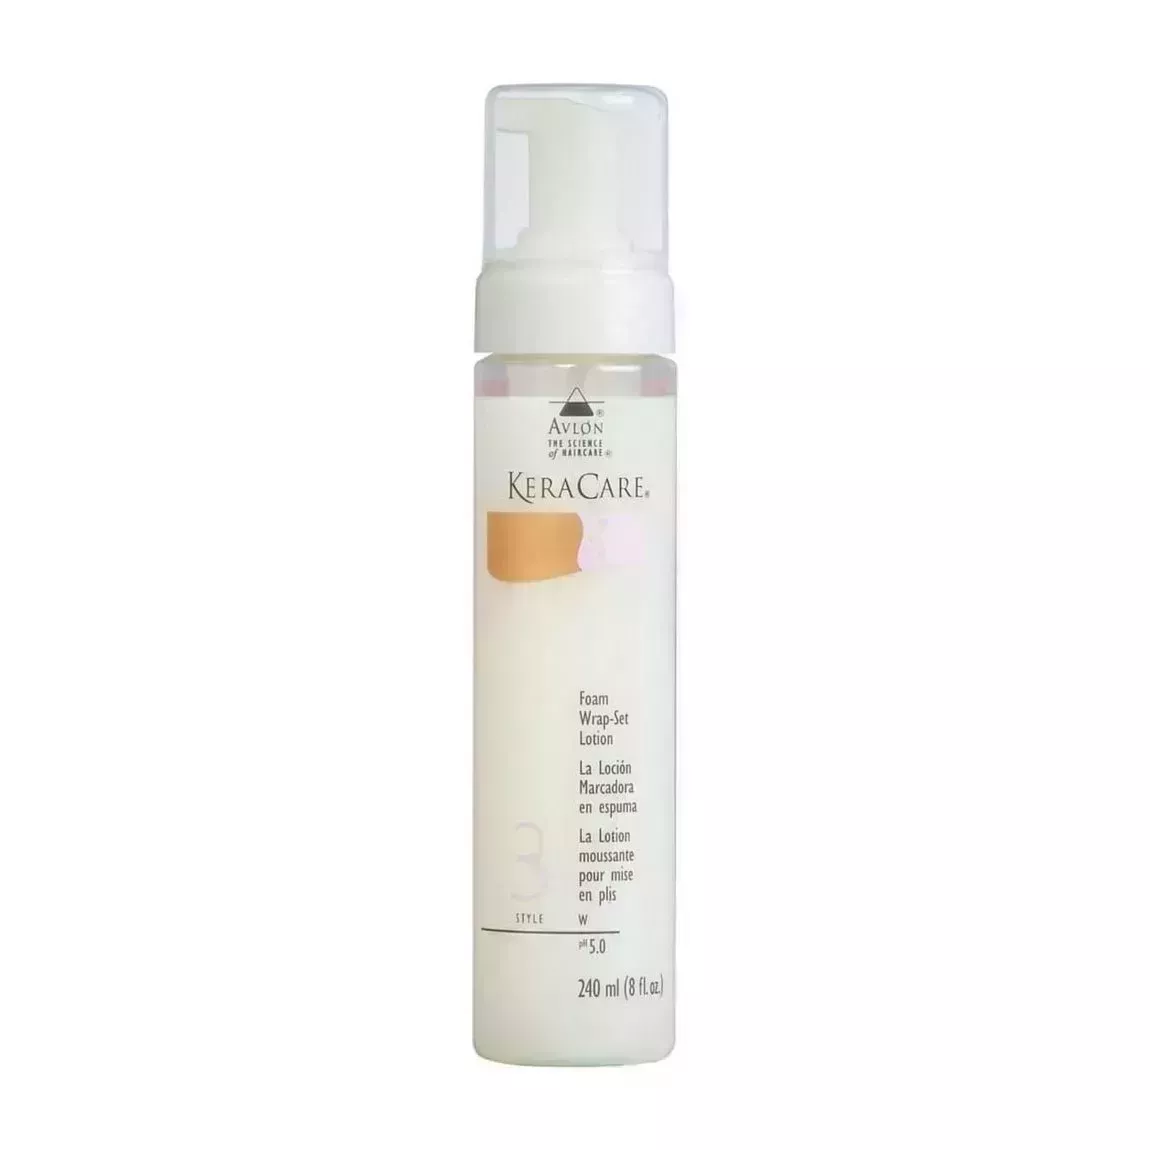 KeraCare Foam Wrap-Setting Lotion white bottle with pump and clear cap on white background